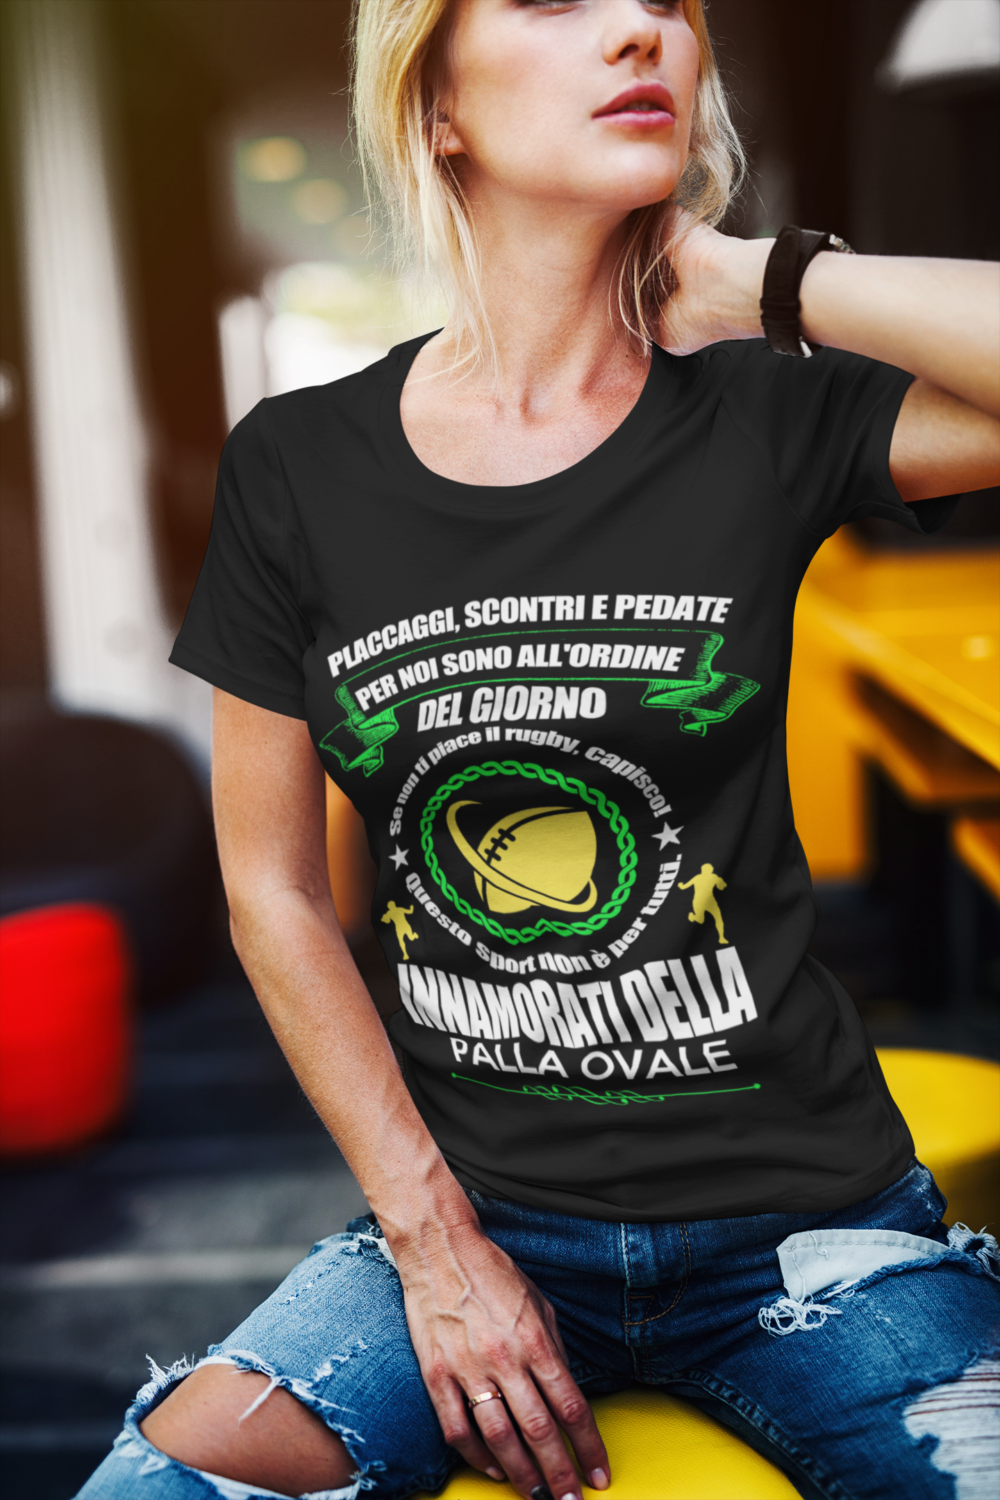 t shirt mockup of a fabulous woman with blonde hair 2238 el1